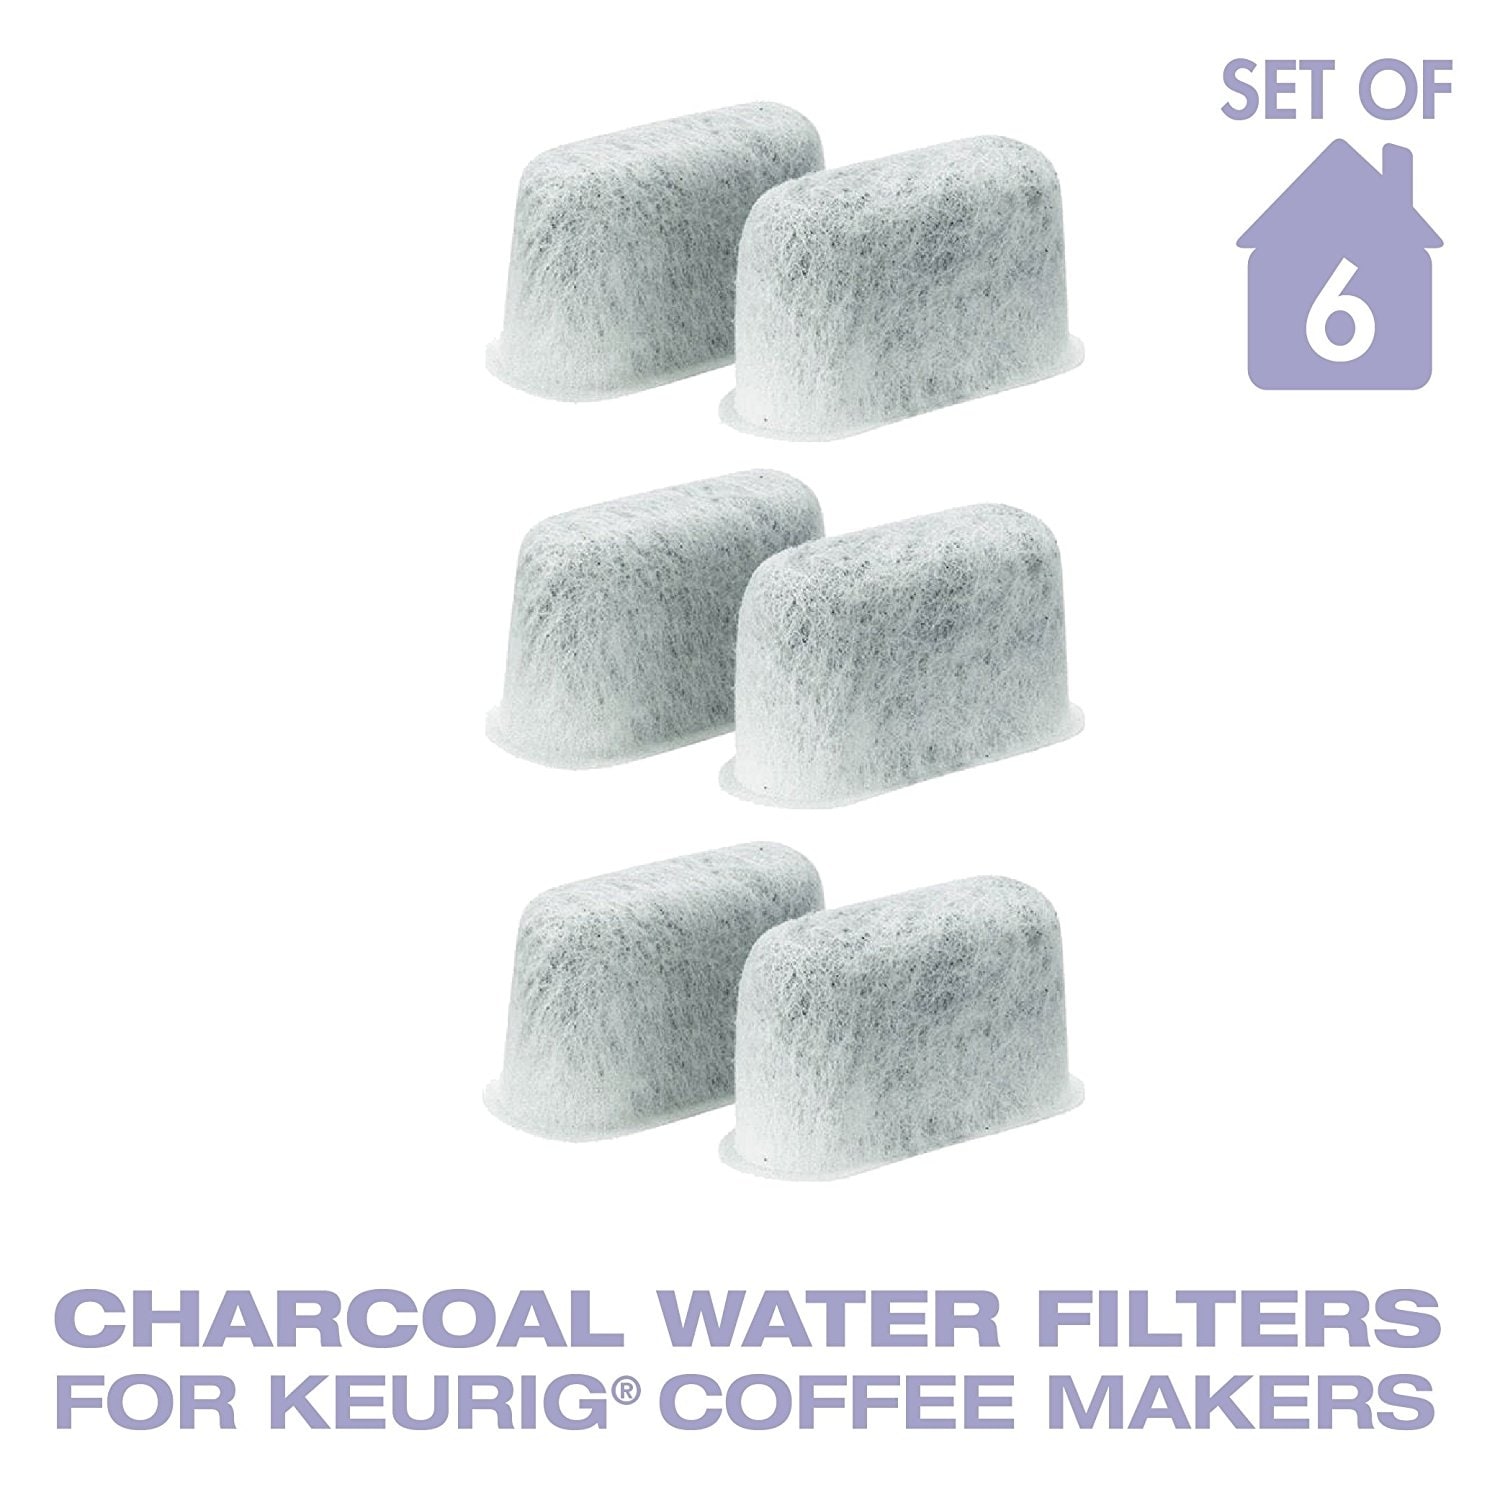 https://ak1.ostkcdn.com/images/products/is/images/direct/5e1063287549b35dad90bdef6e9799e8163284b0/GoldTone-Charcoal-Water-Coffee-Filter-Cartridges%2C-Replaces-Keurig-05073-Charcoal-Water-Coffee-Filters--Set-of%C2%A06.jpg